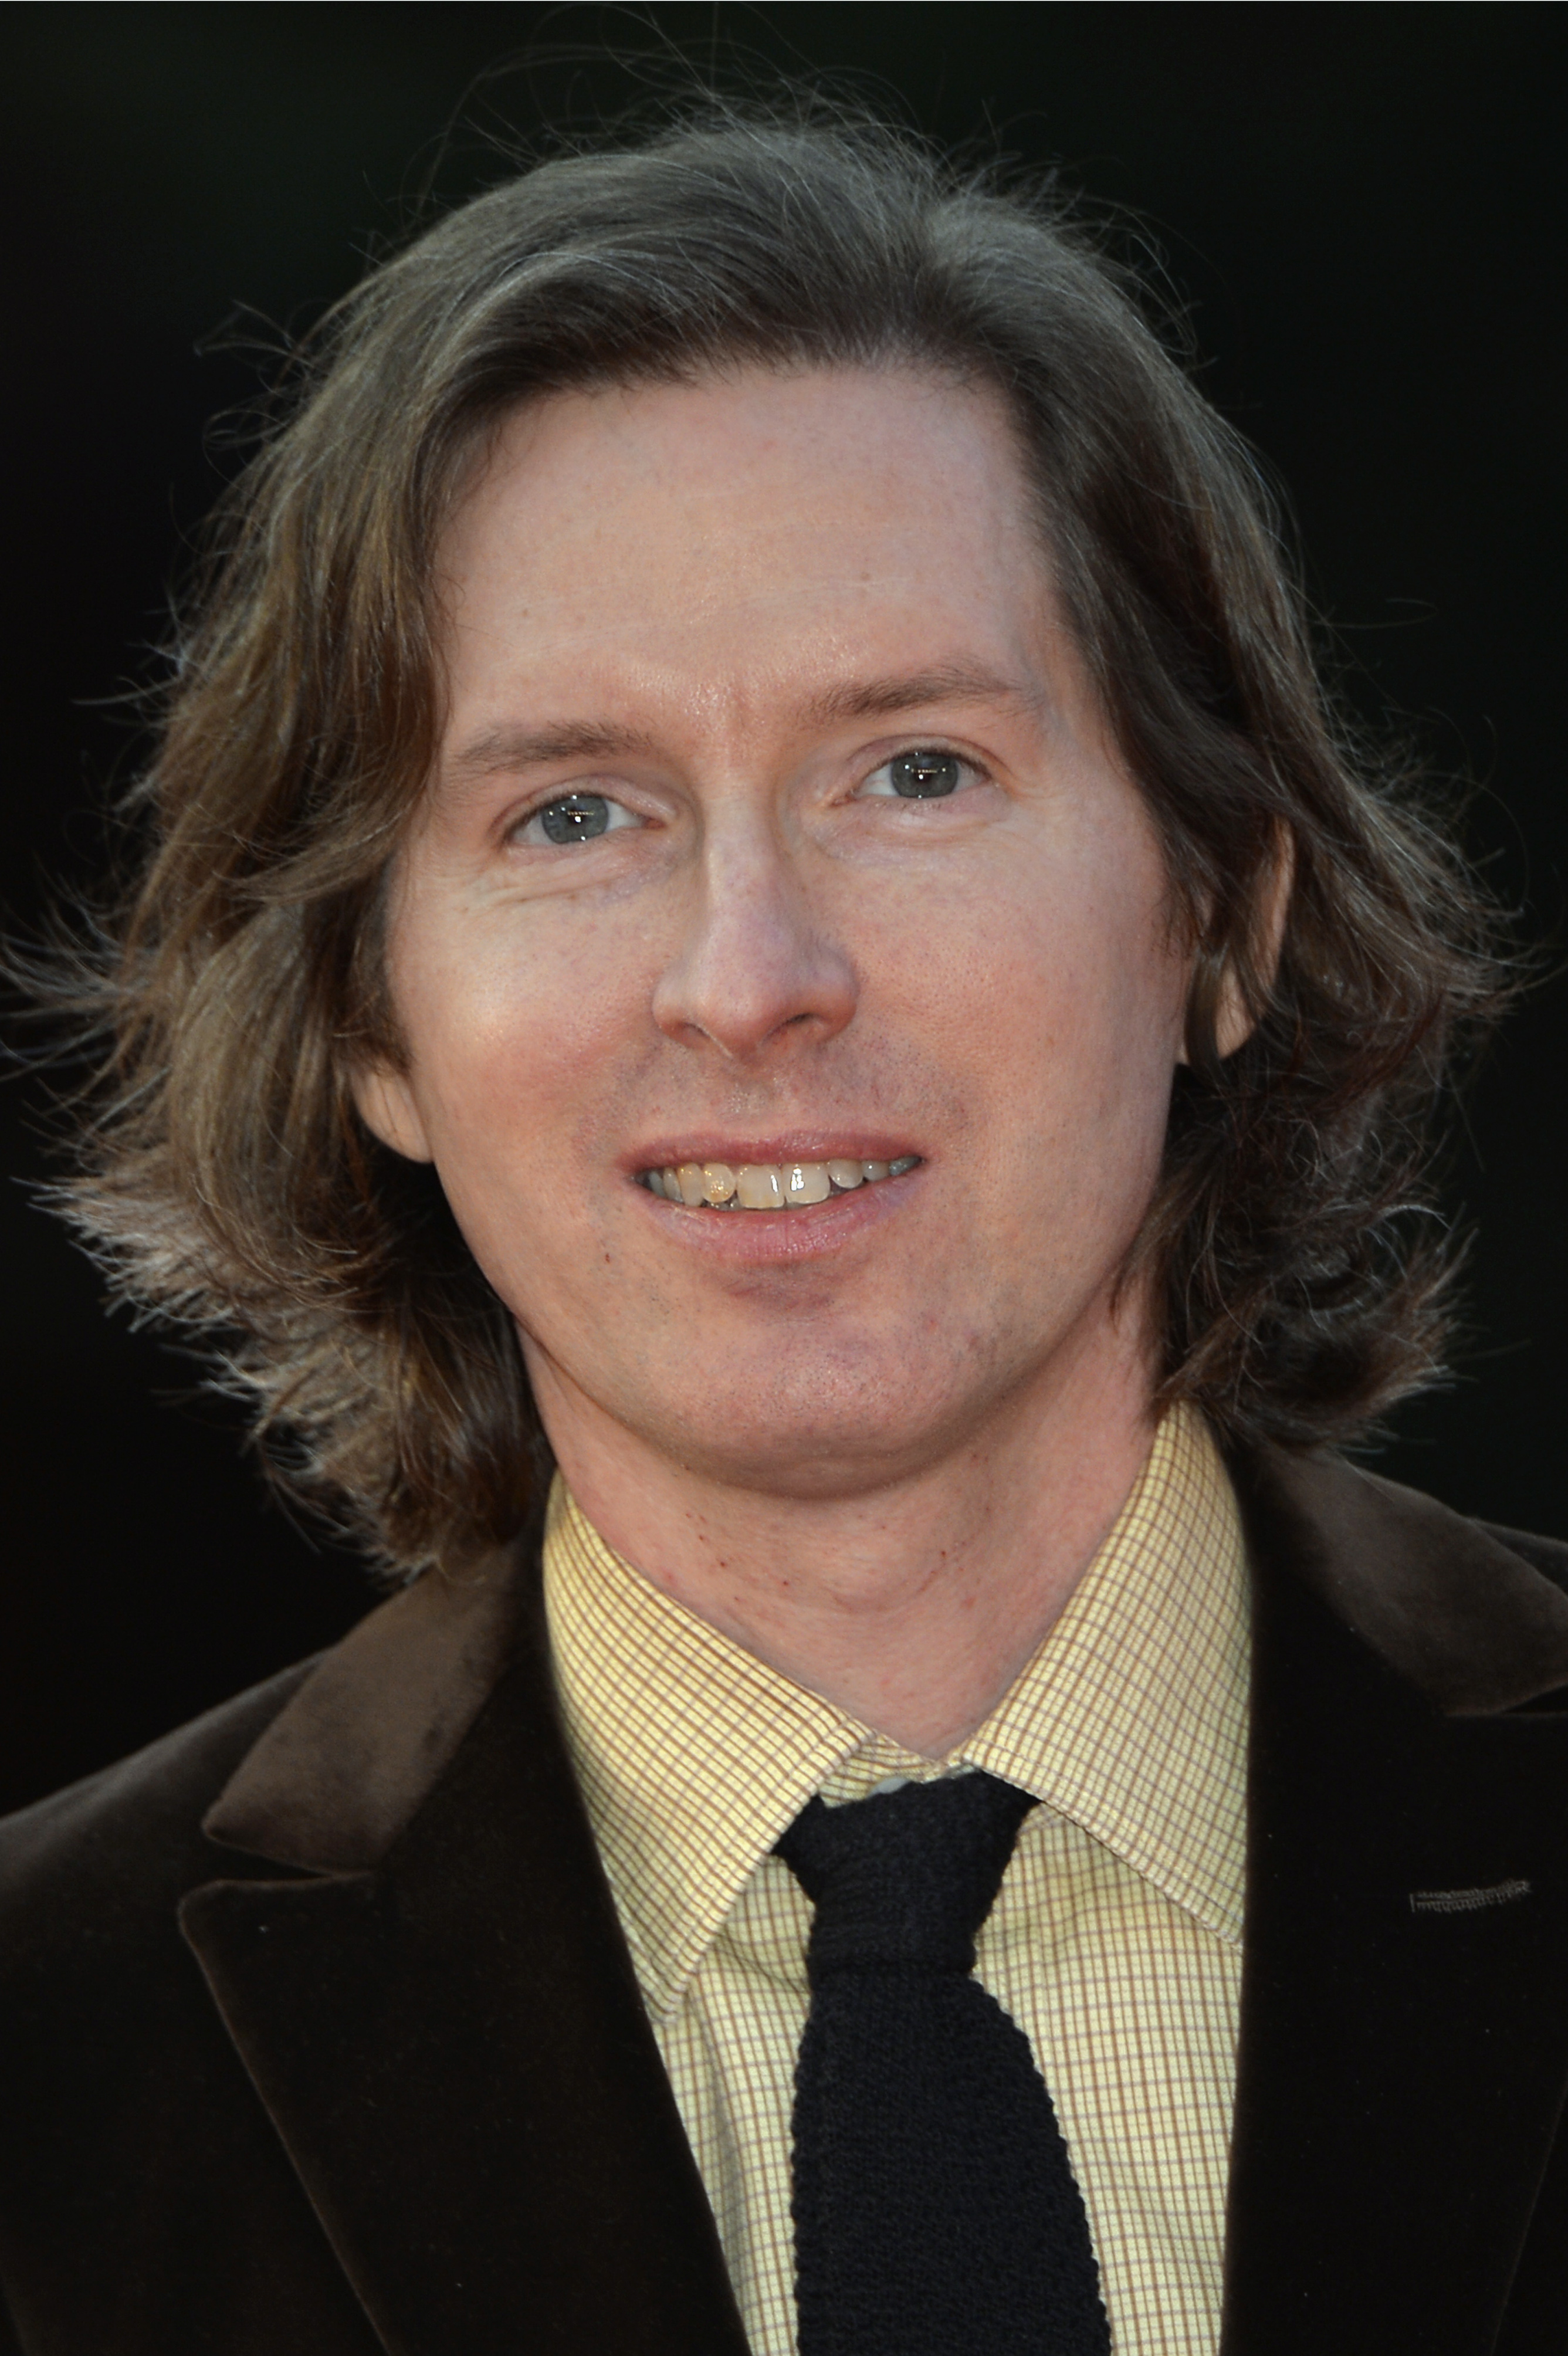 Wes Anderson’s New Movie ‘Isle of Dogs’ Now Has a Release Date2673 x 4016